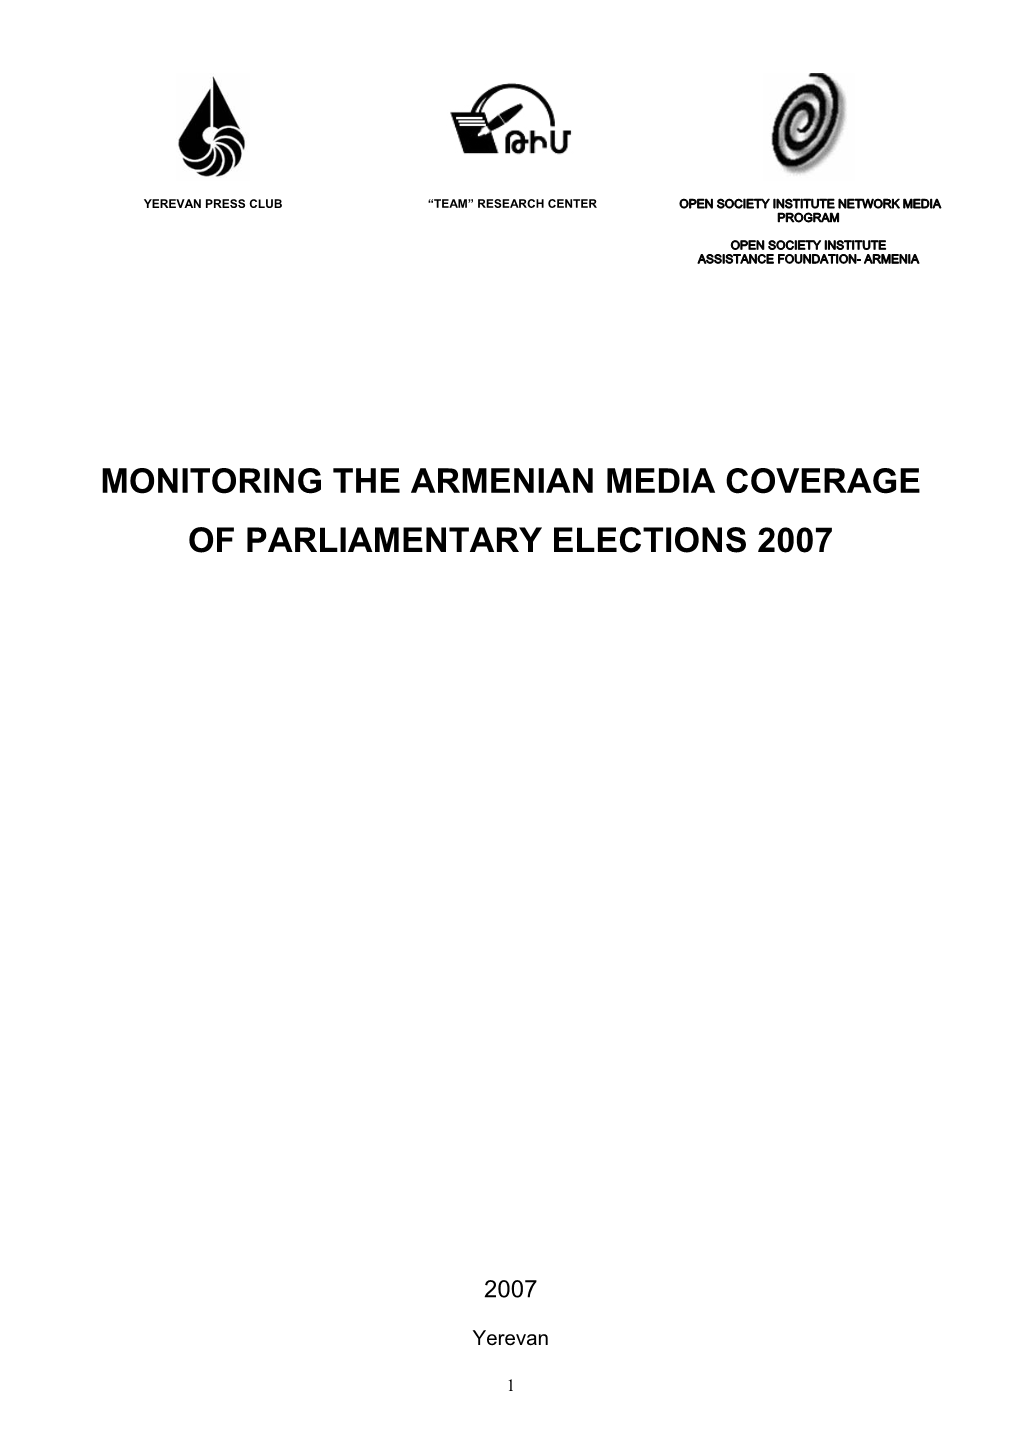 Monitoring the Armenian Media Coverage of Parliamentary Elections 2007